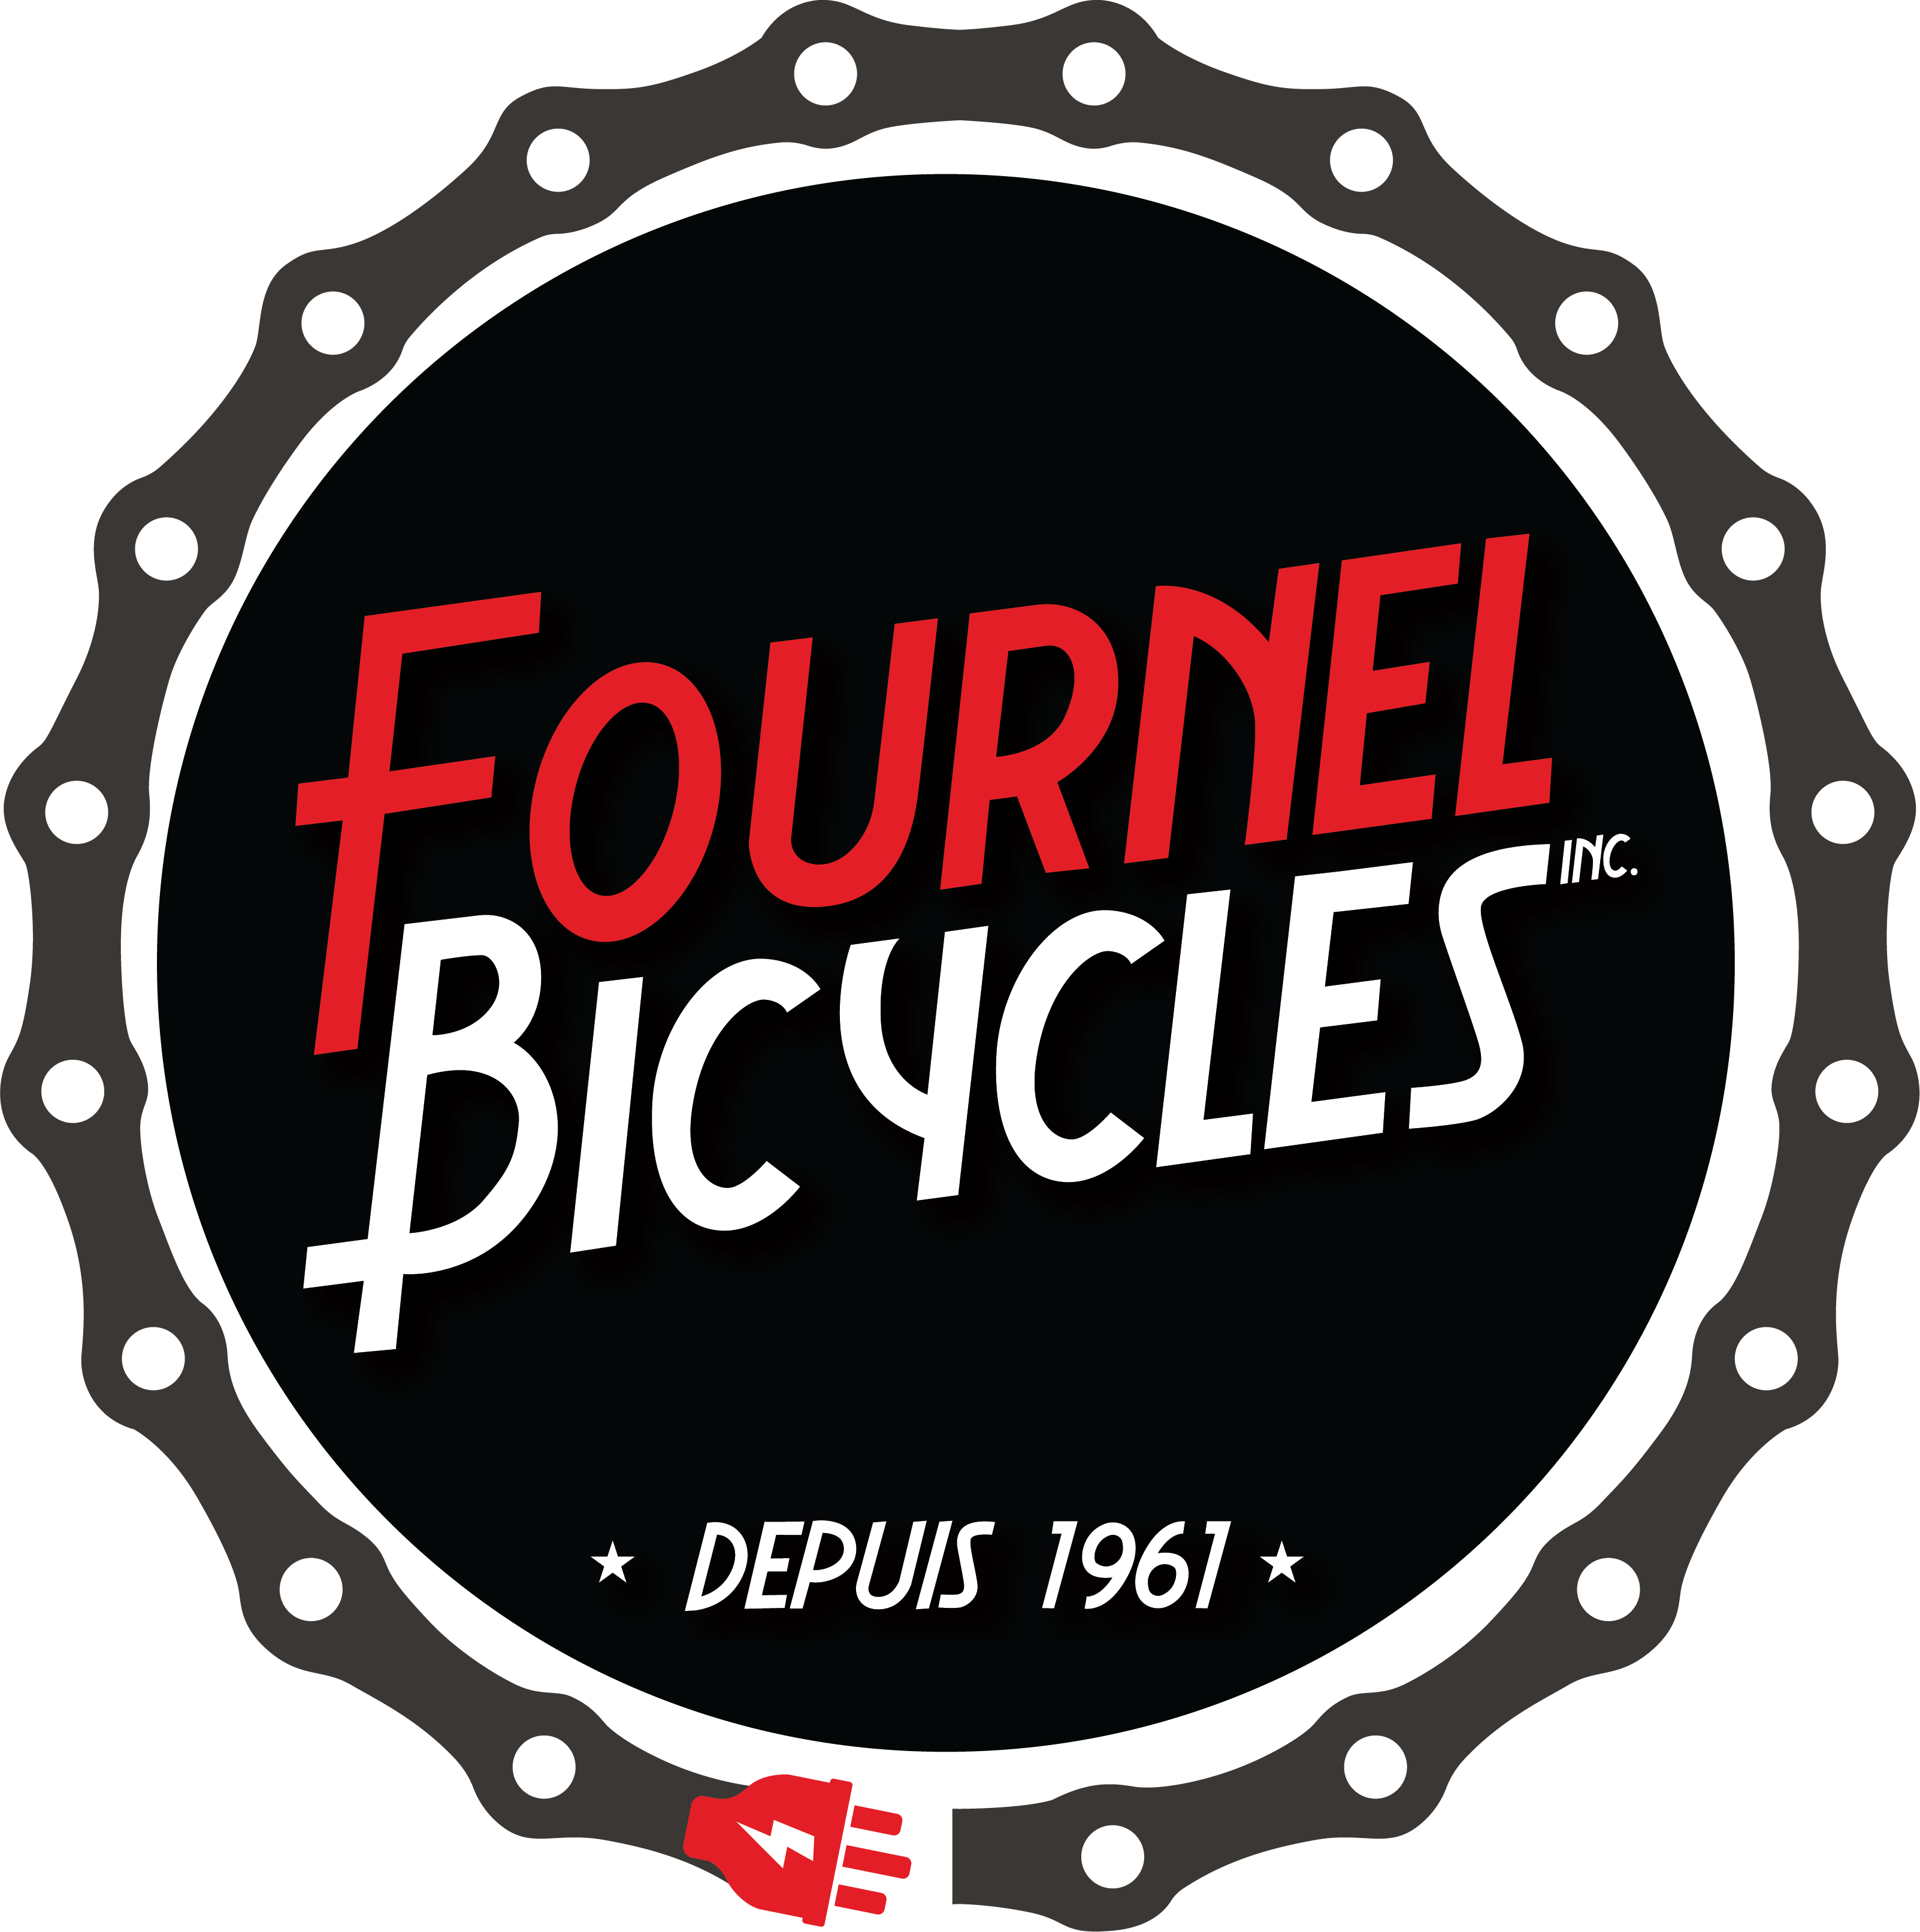 Fournel Bicycles